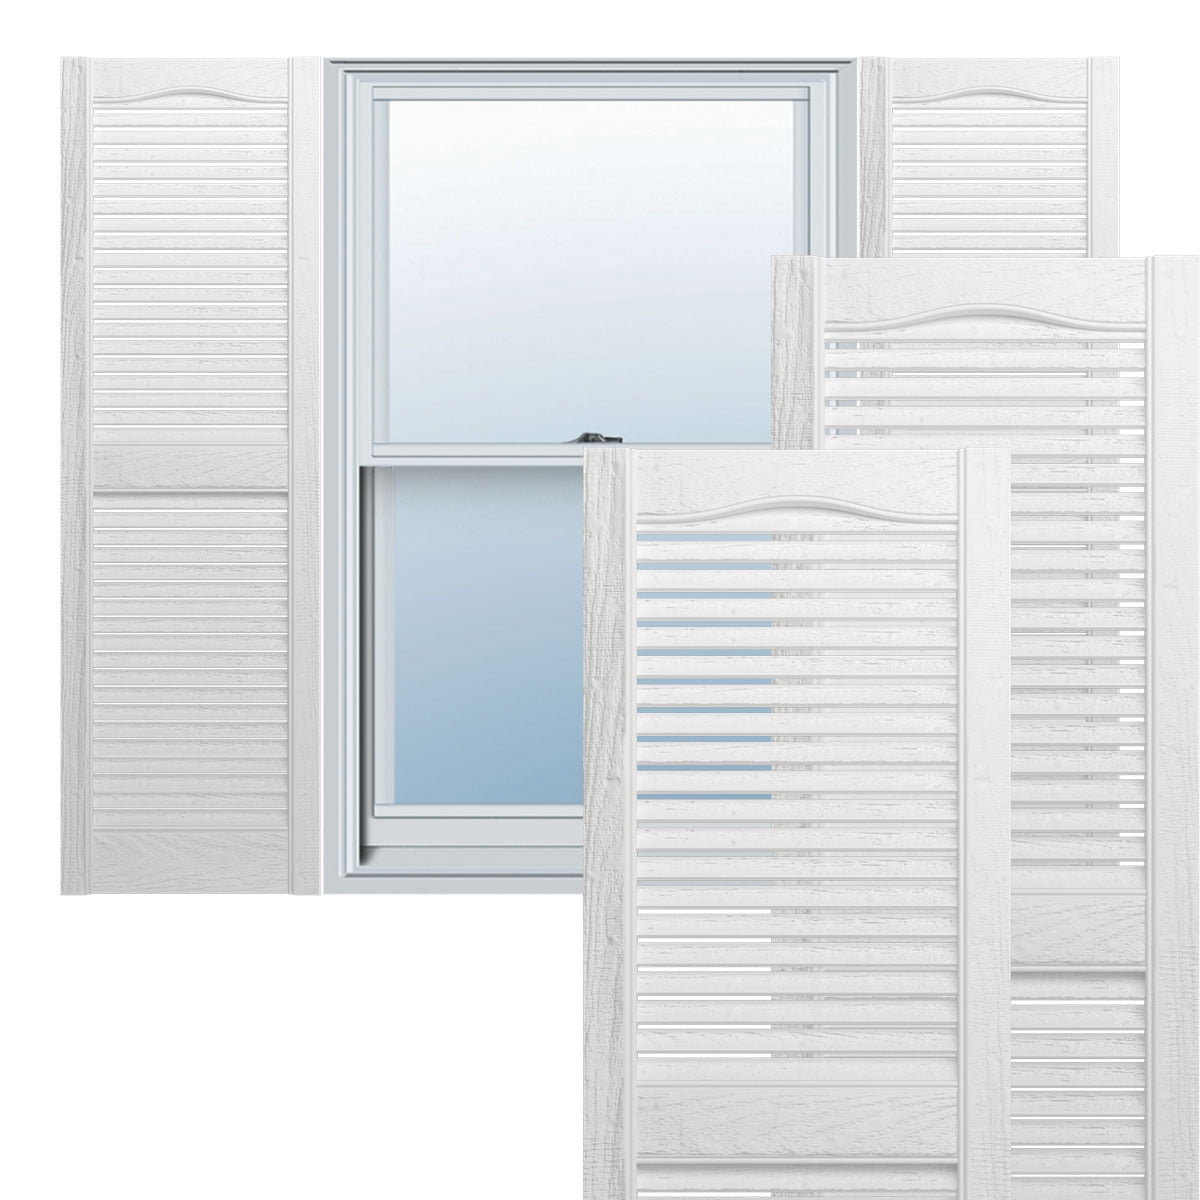 Details about   Mid America Raised Panel Vinyl Shutters 14.75in. 1 Pair 